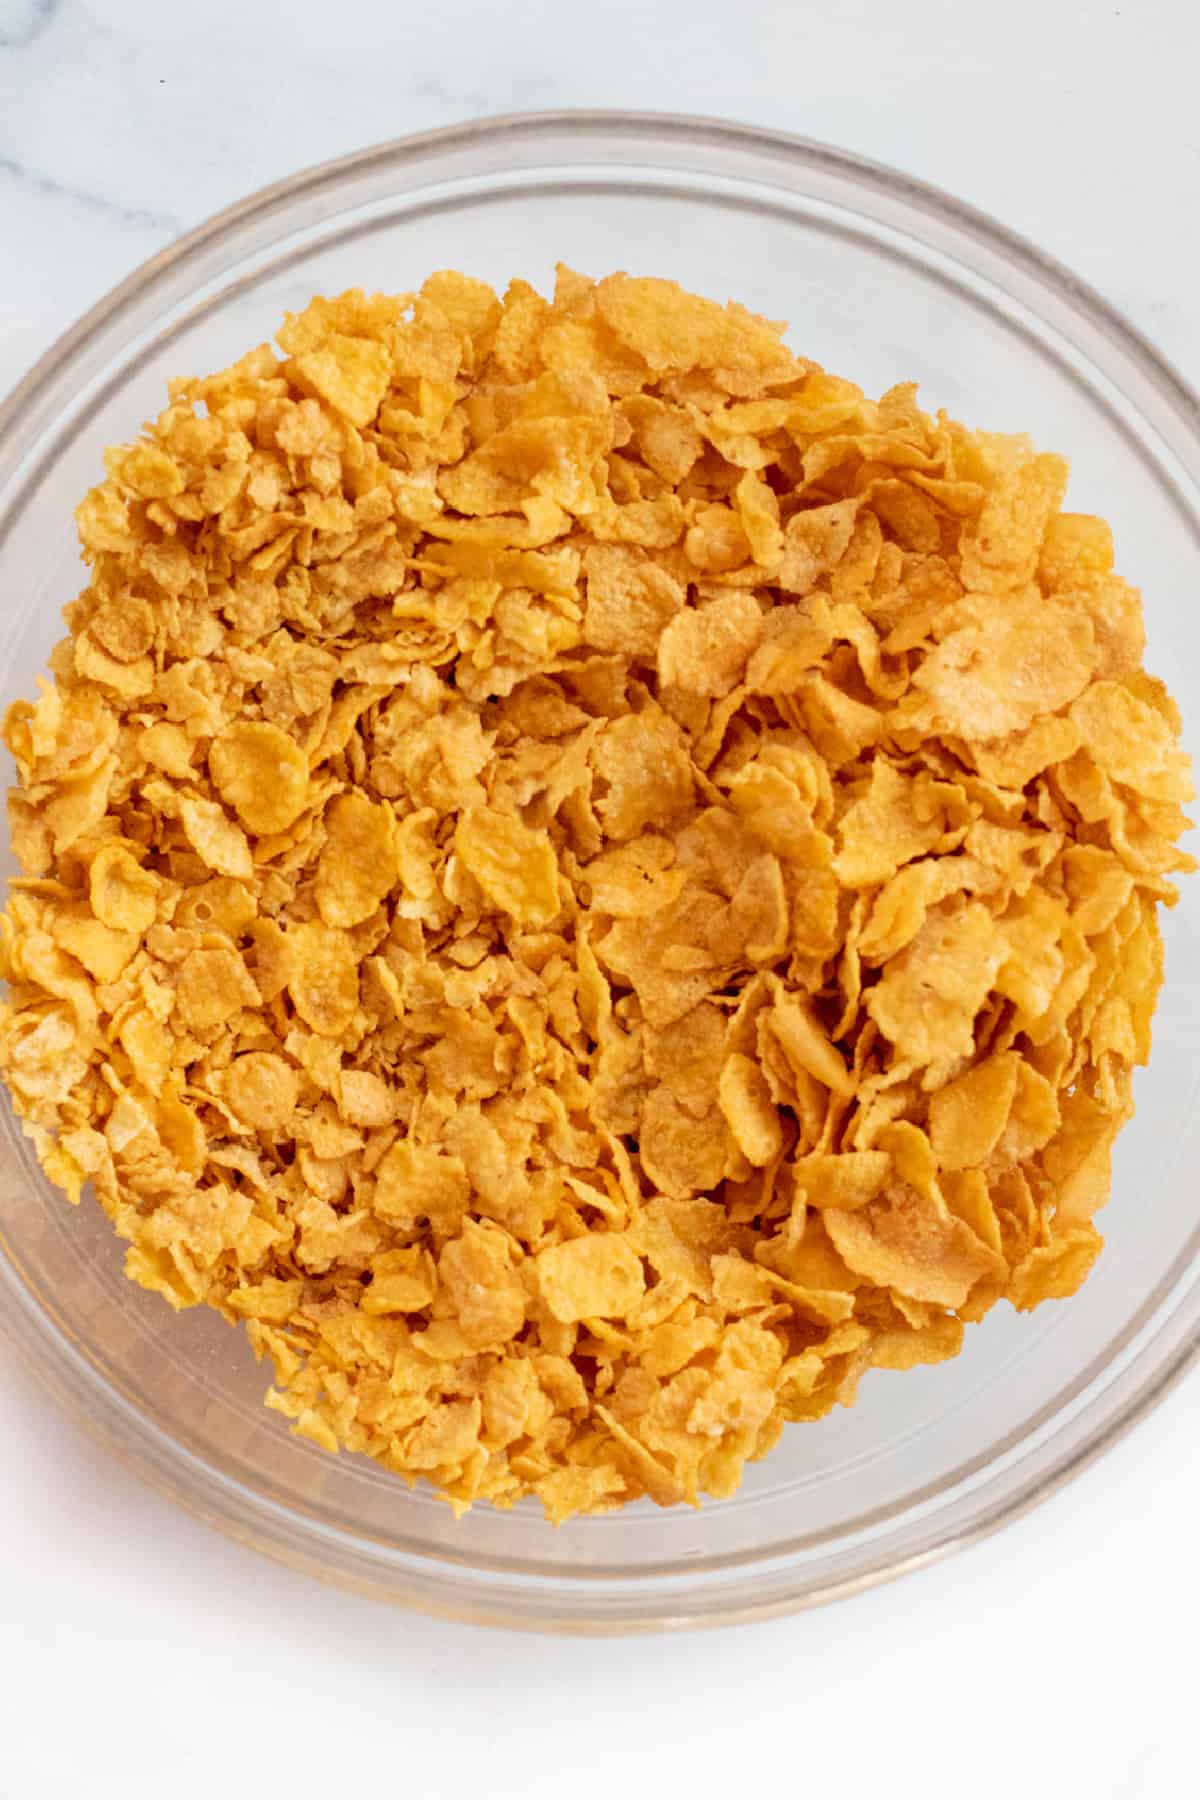 a bowl of cornflakes with some crushed and some whole.